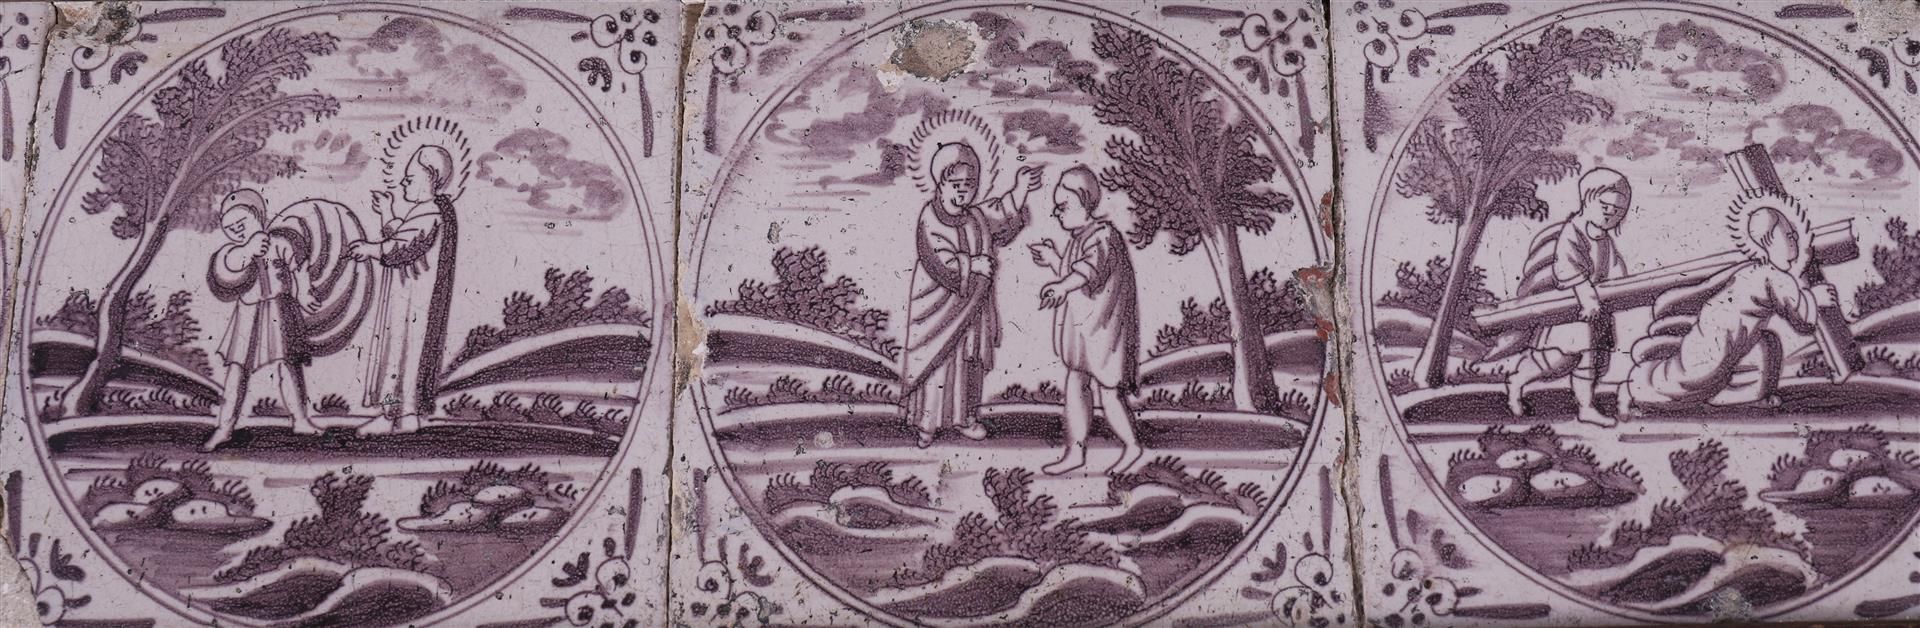 Two tableaus with manganese-colored religious tiles, 18th century. - Image 3 of 3